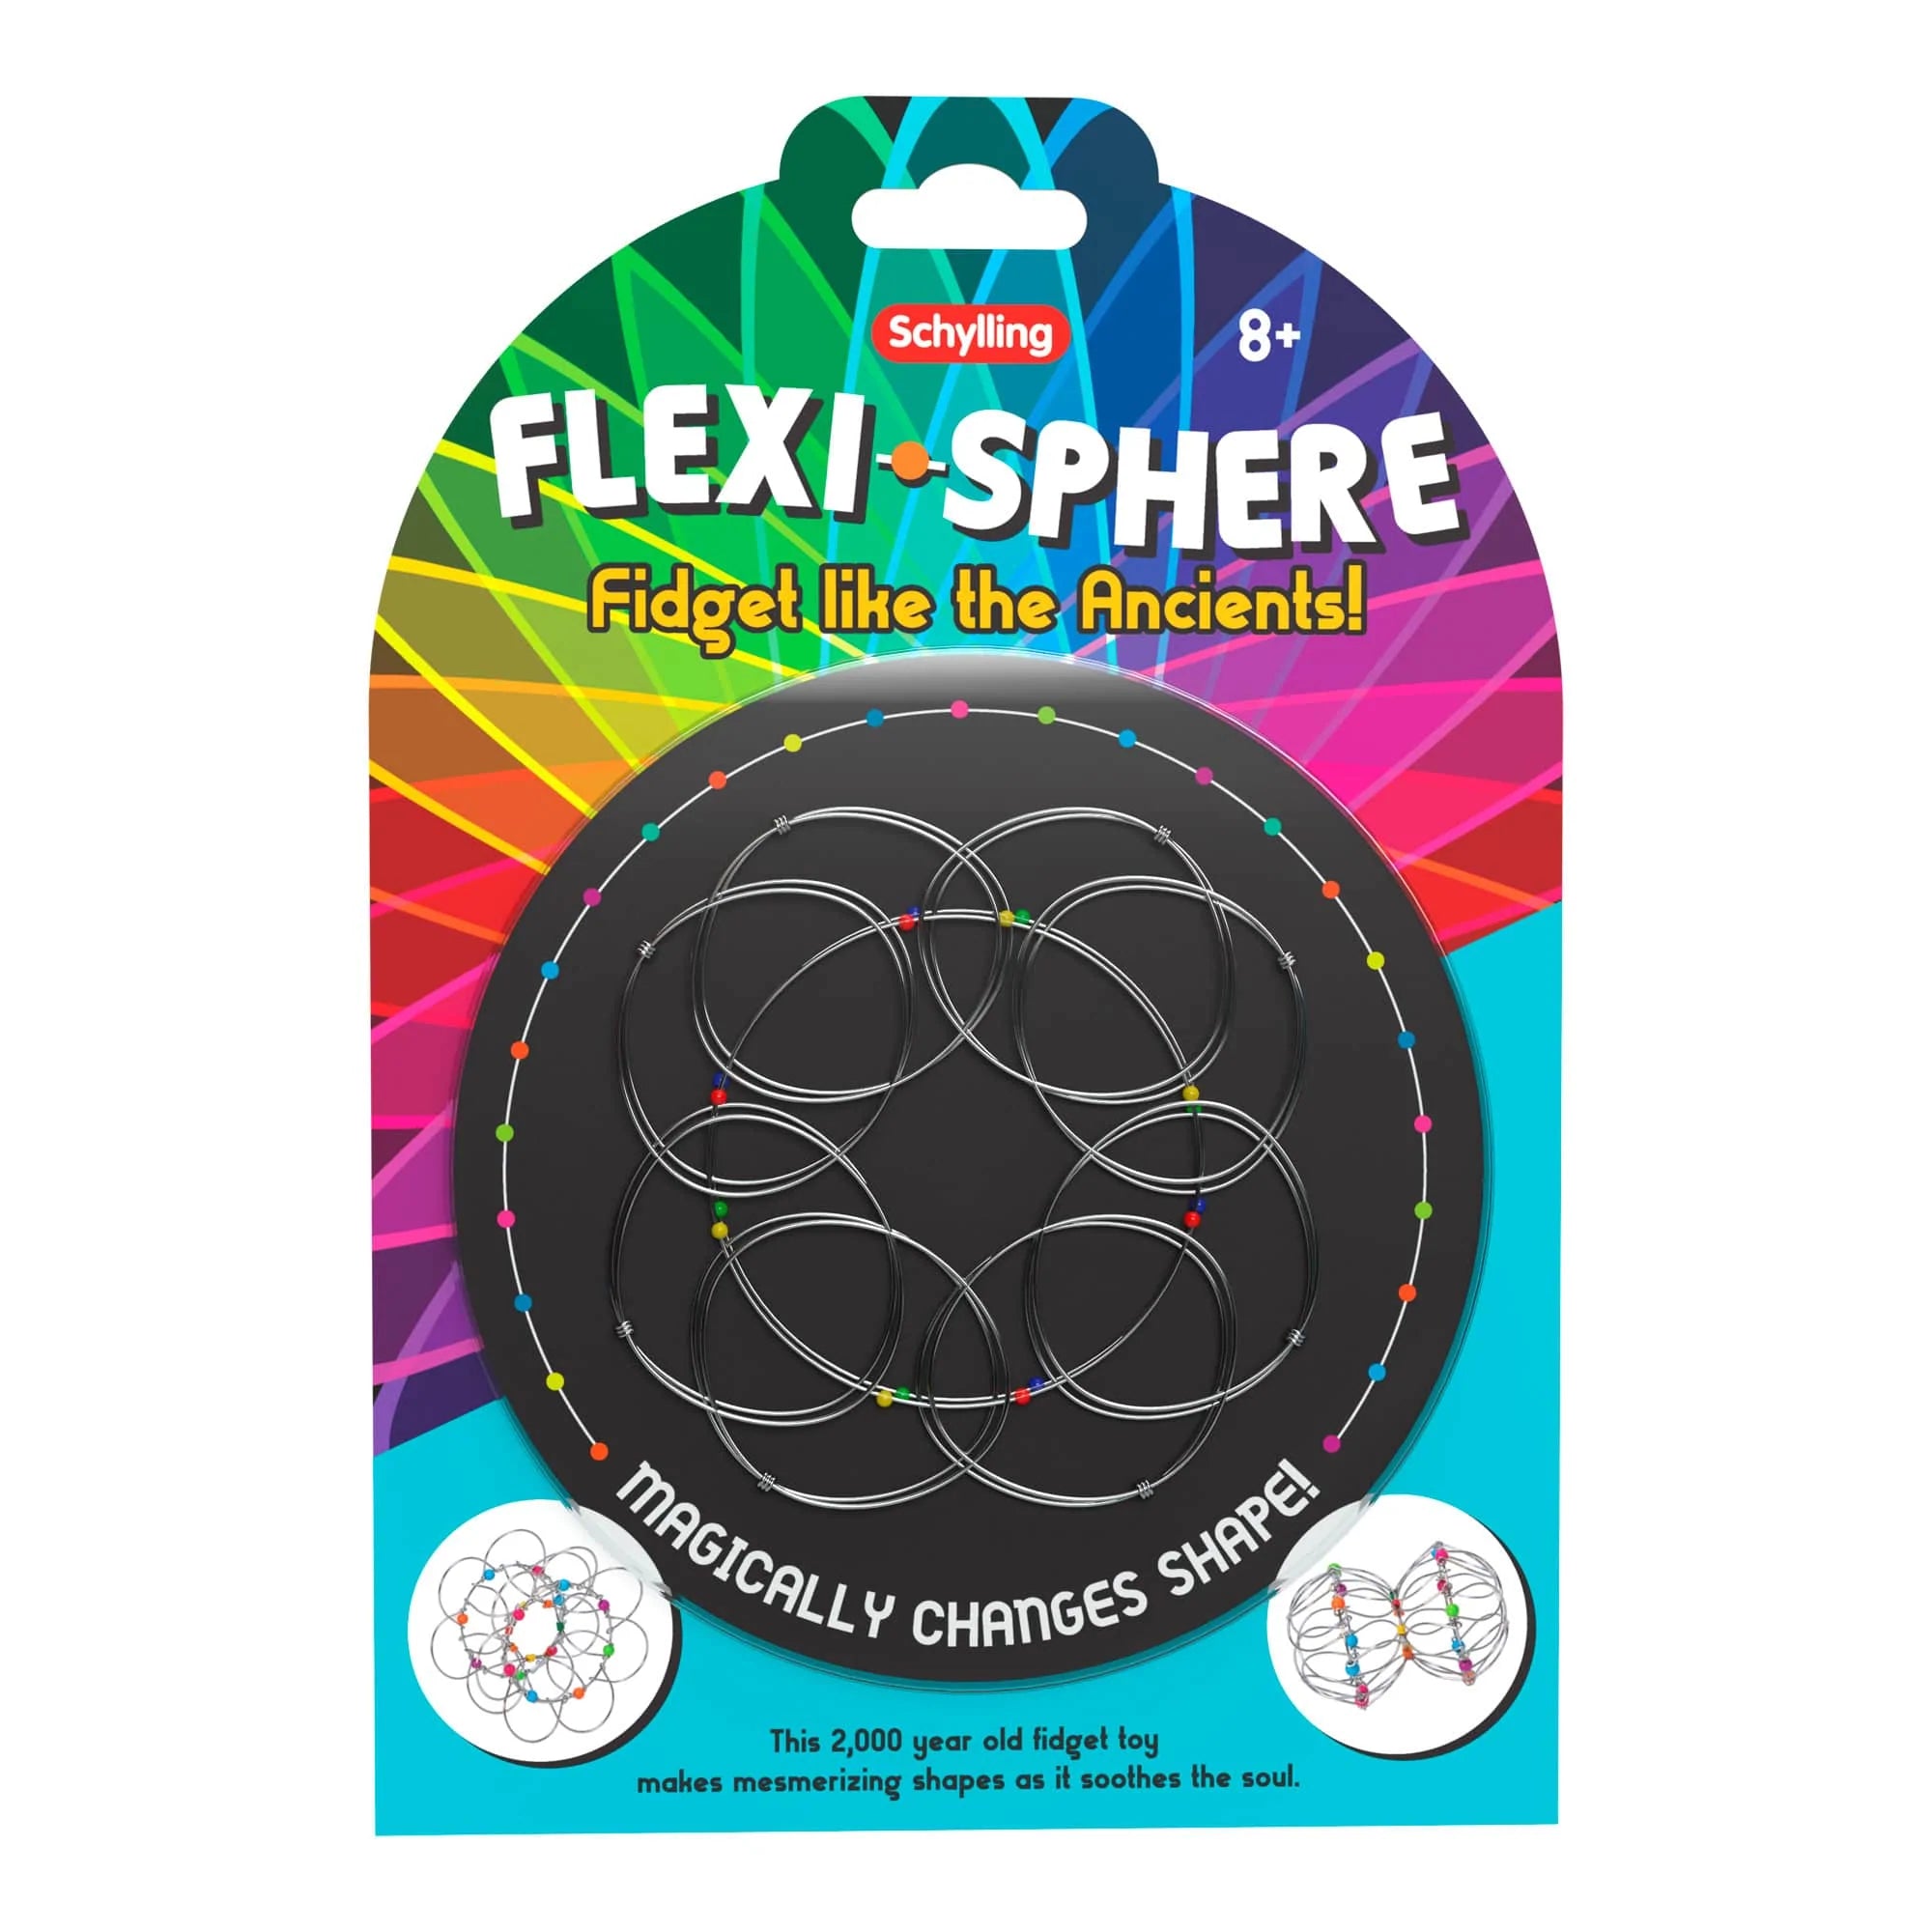 The product package for Flexi-Sphere.